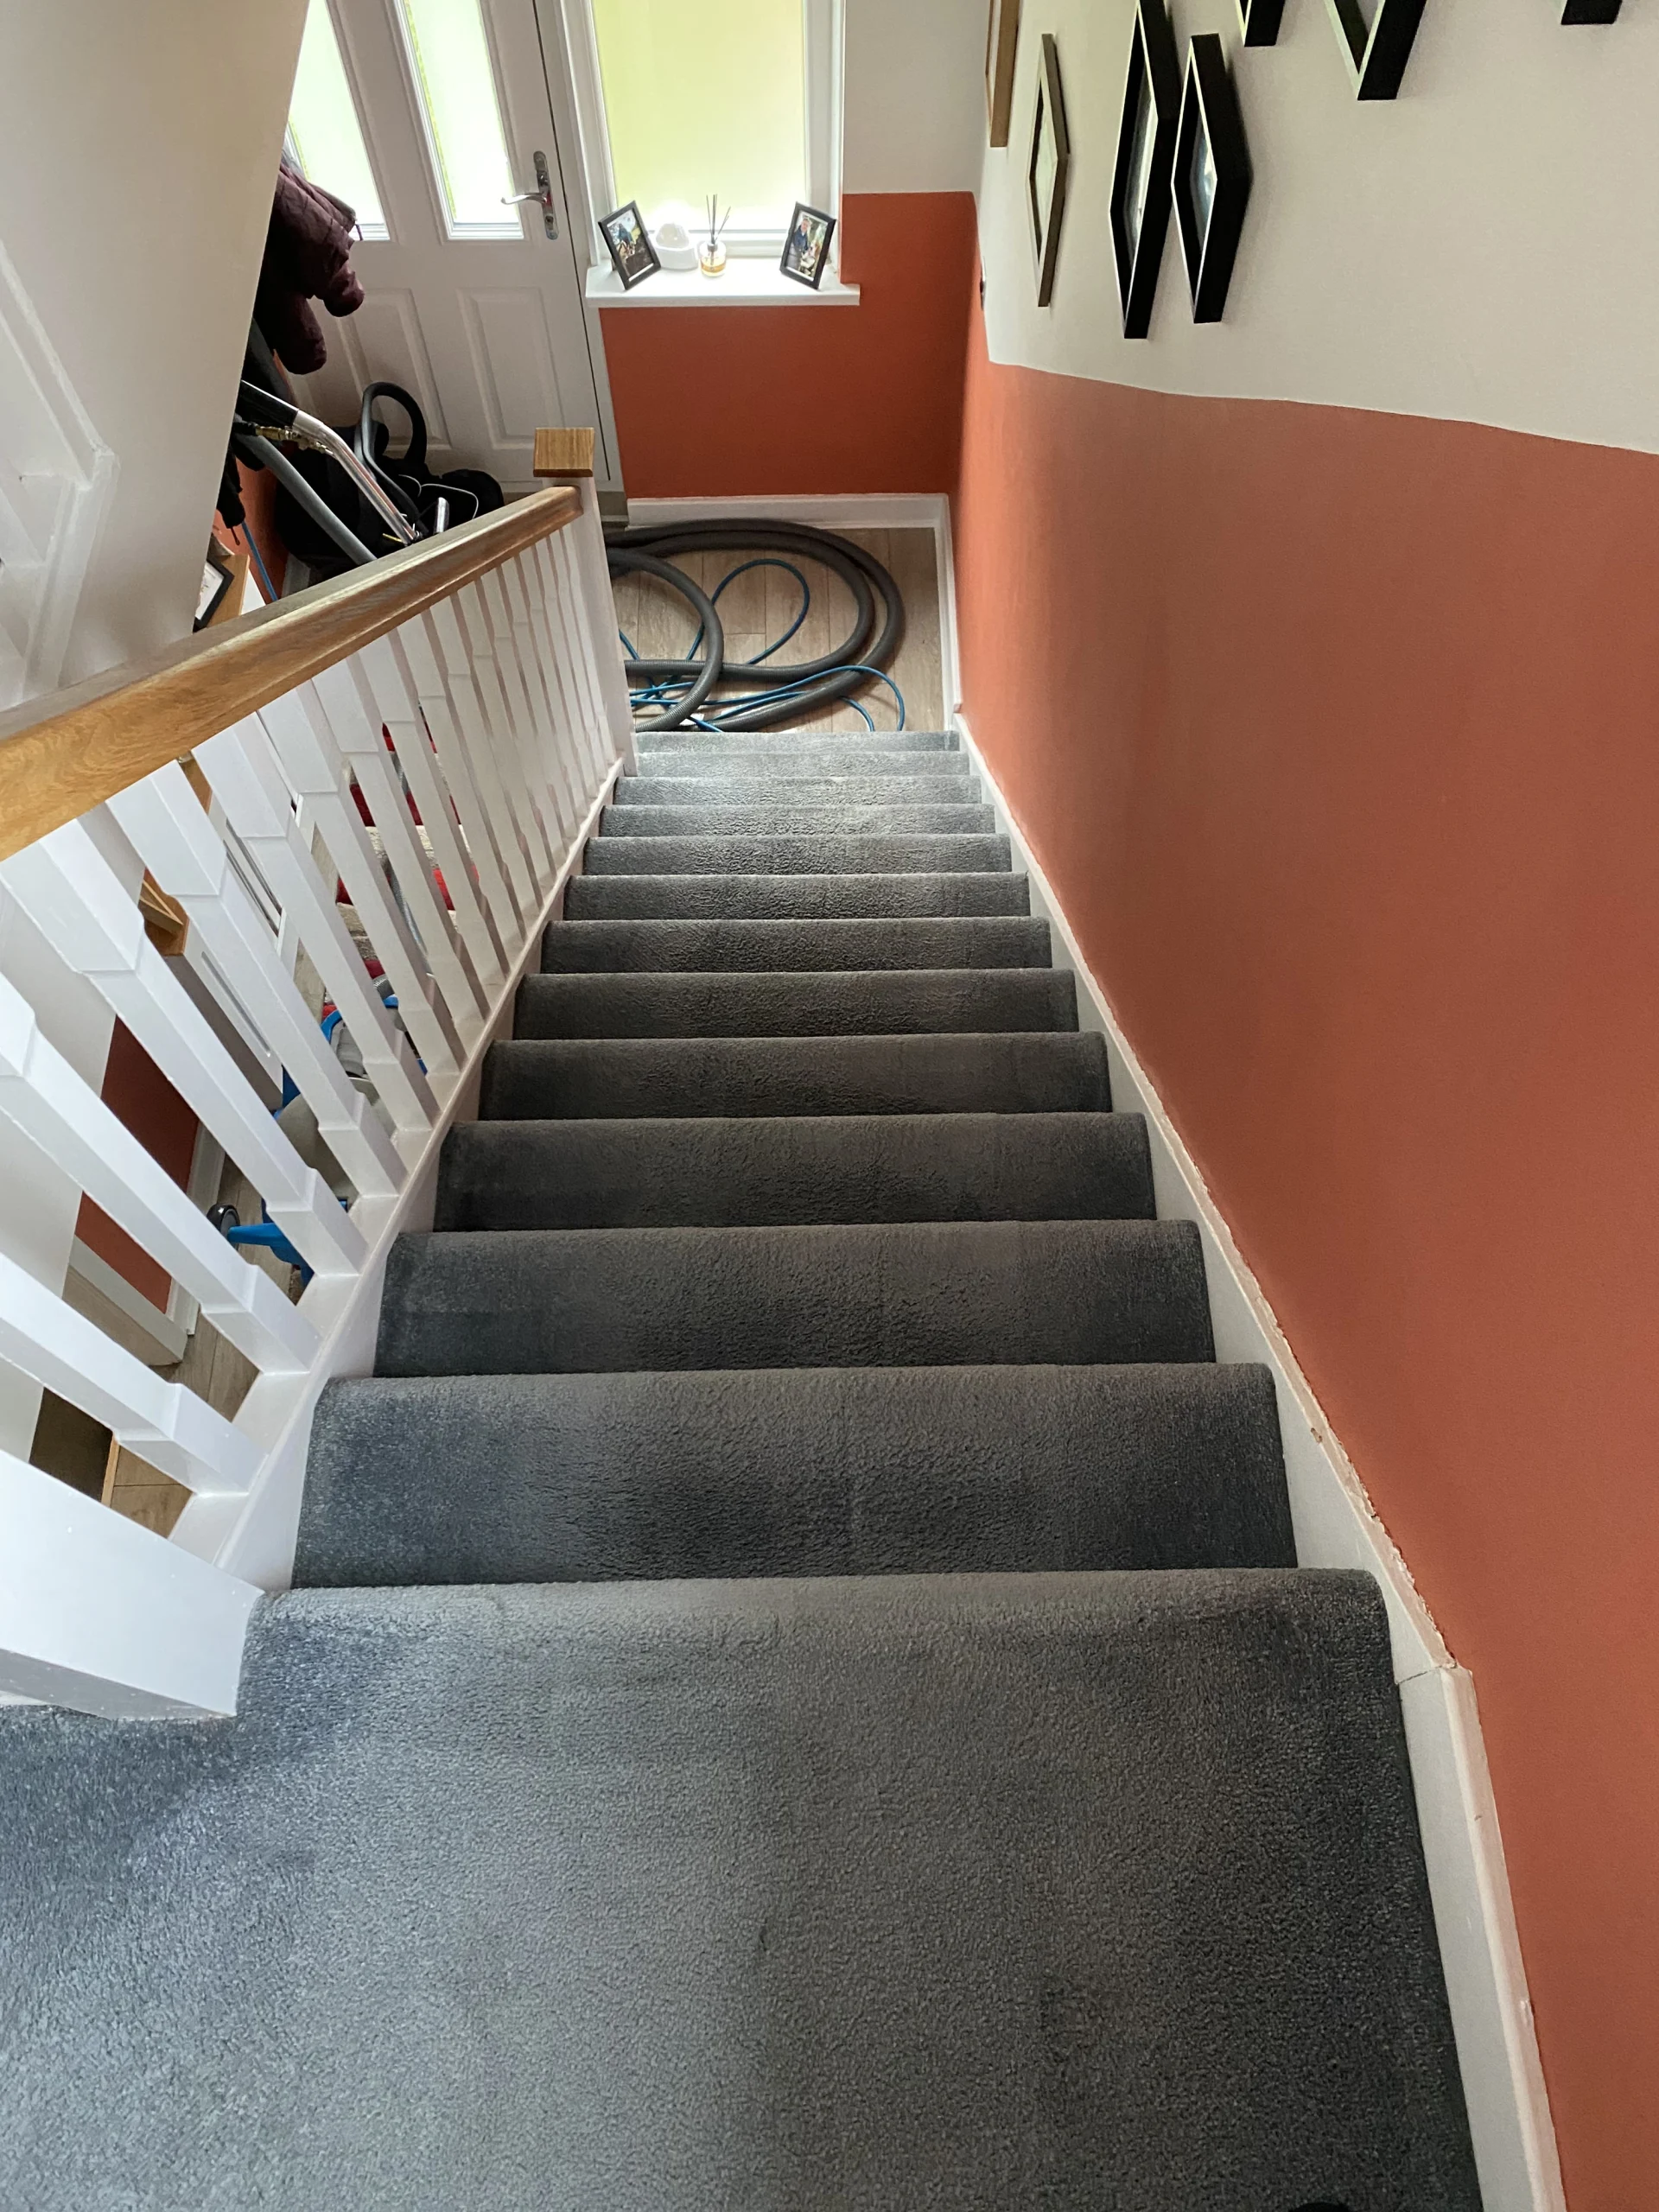 Clean stairs at home in leeds